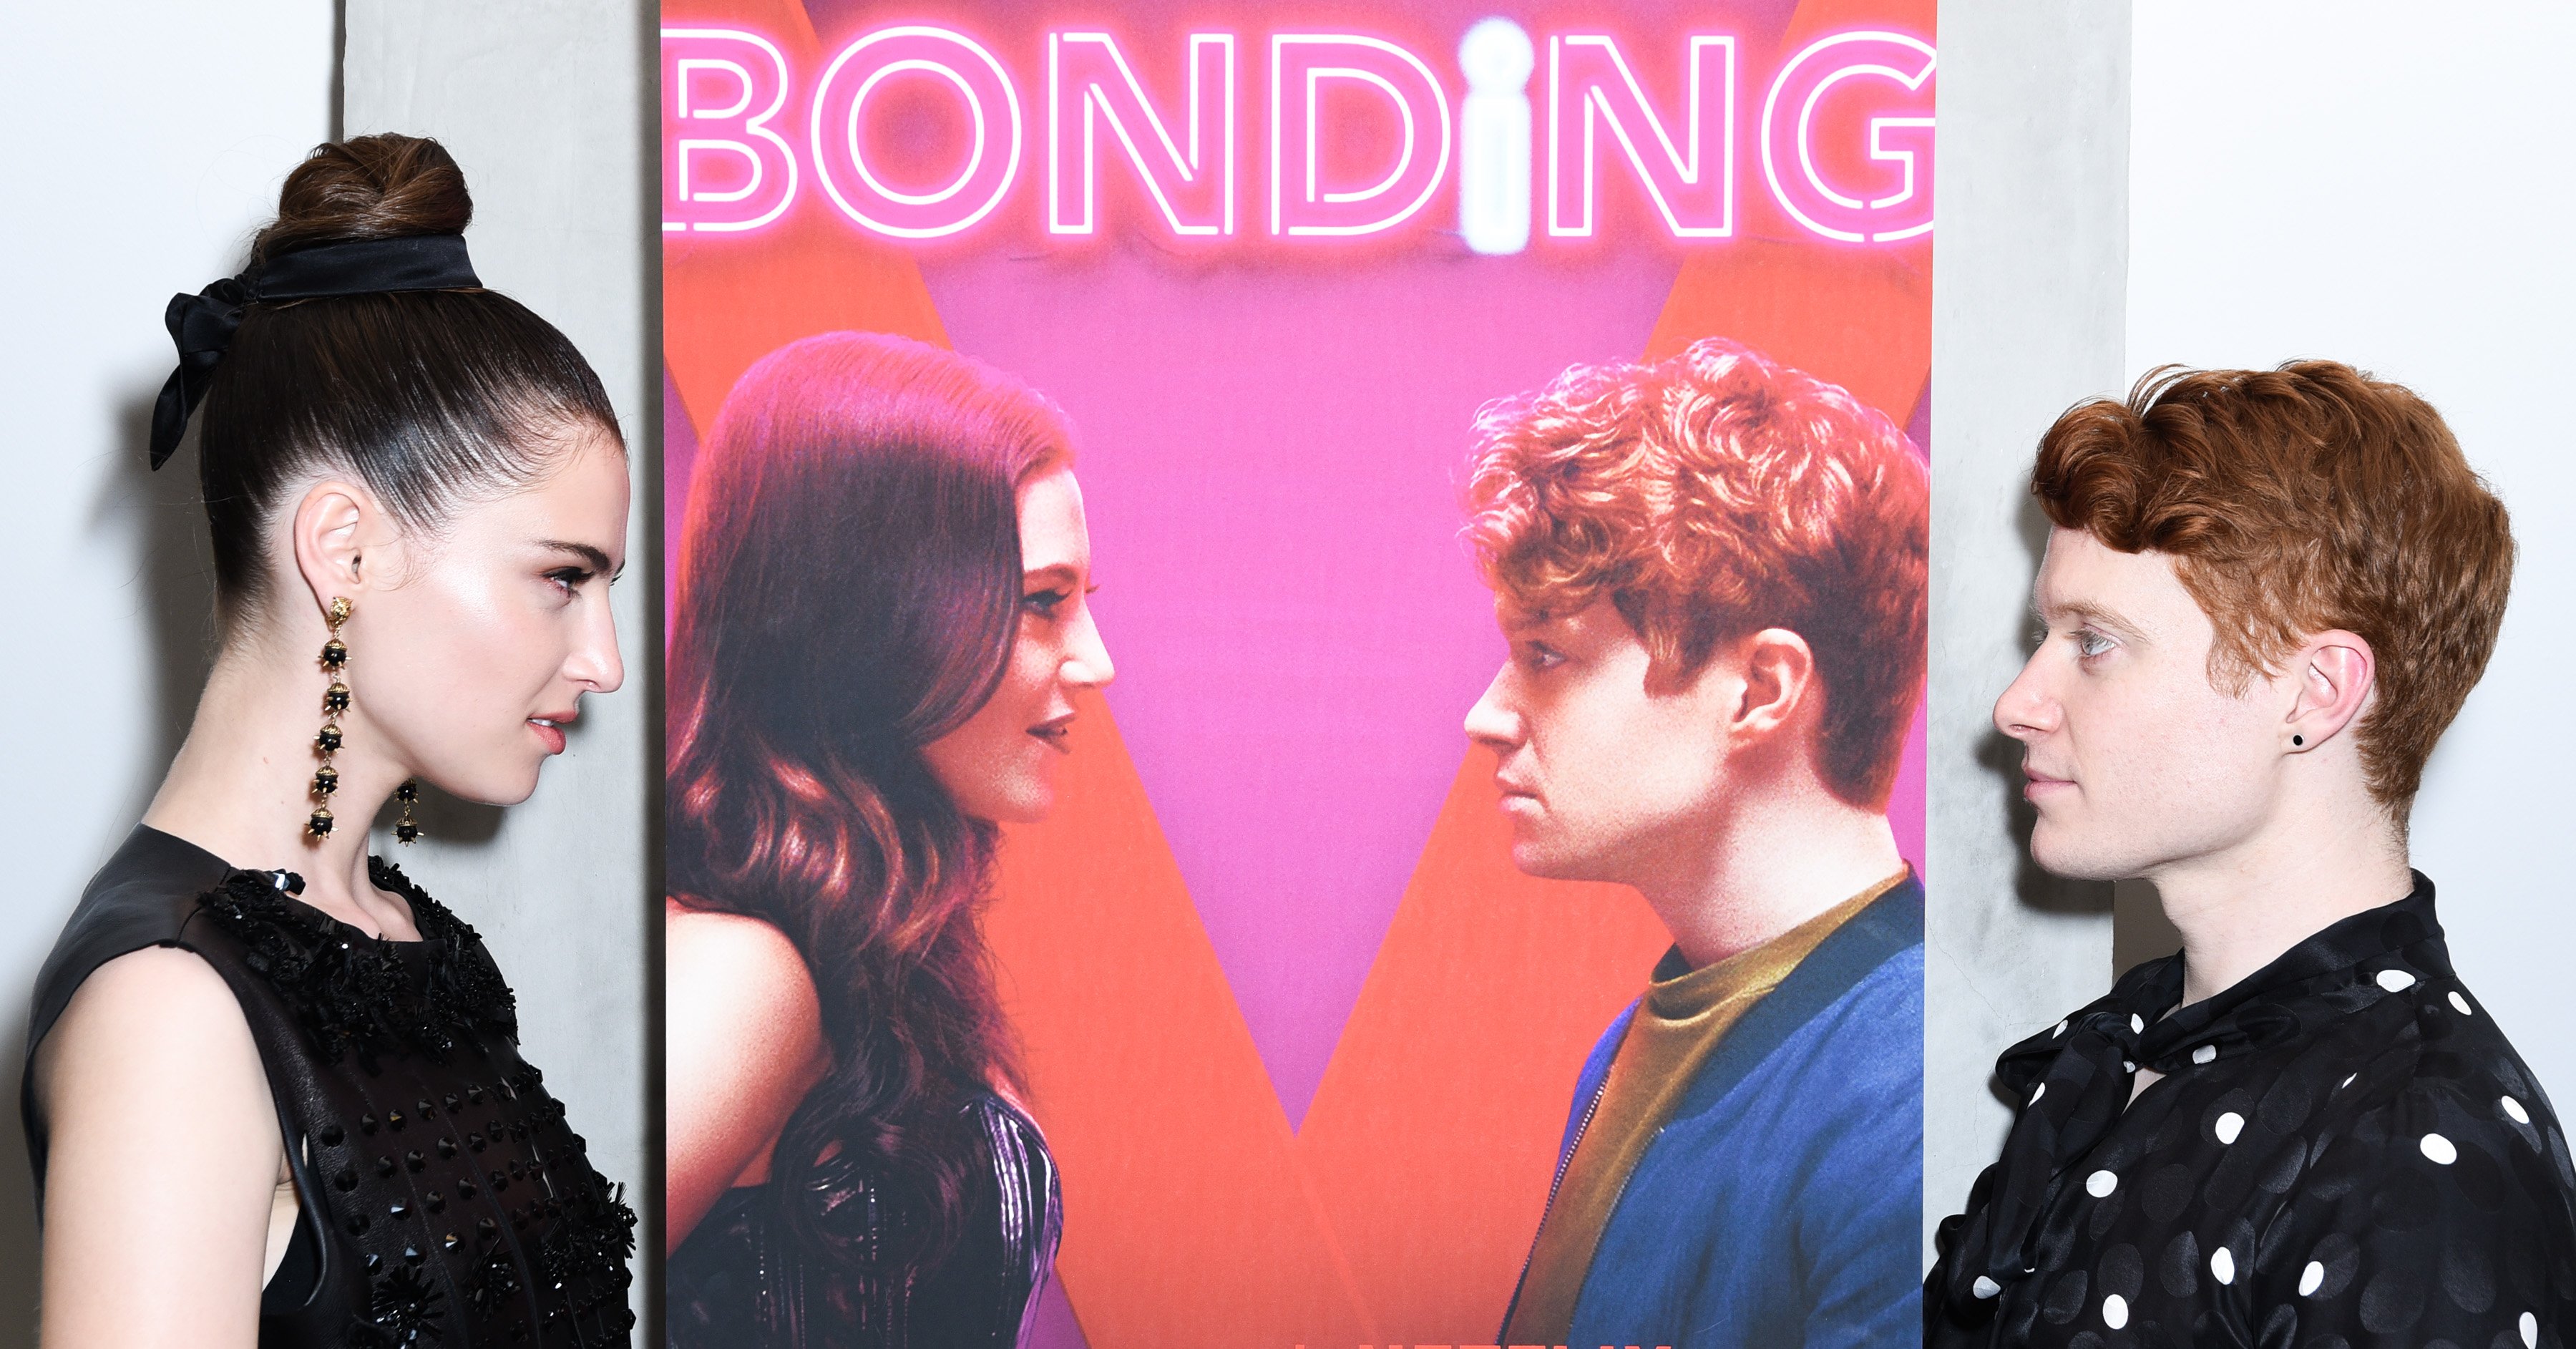 Zoe Levin and Brendan Scannel near a poster for Bonding